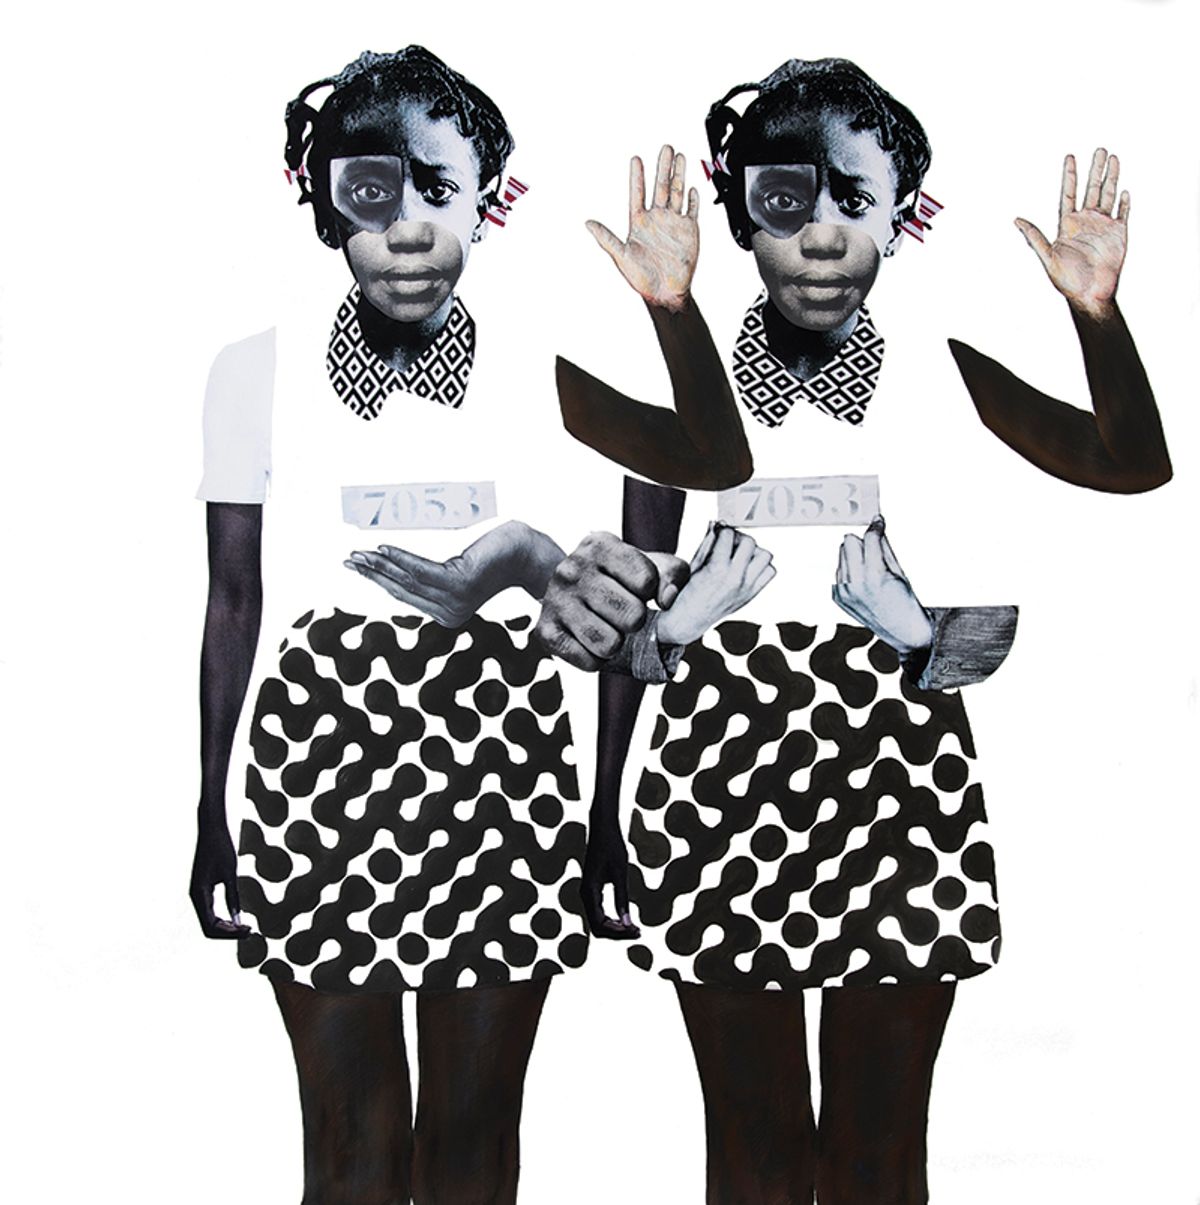 Deborah Roberts’s Political Lambs in a Wolf’s World (2018) will be in the show Robert Beam